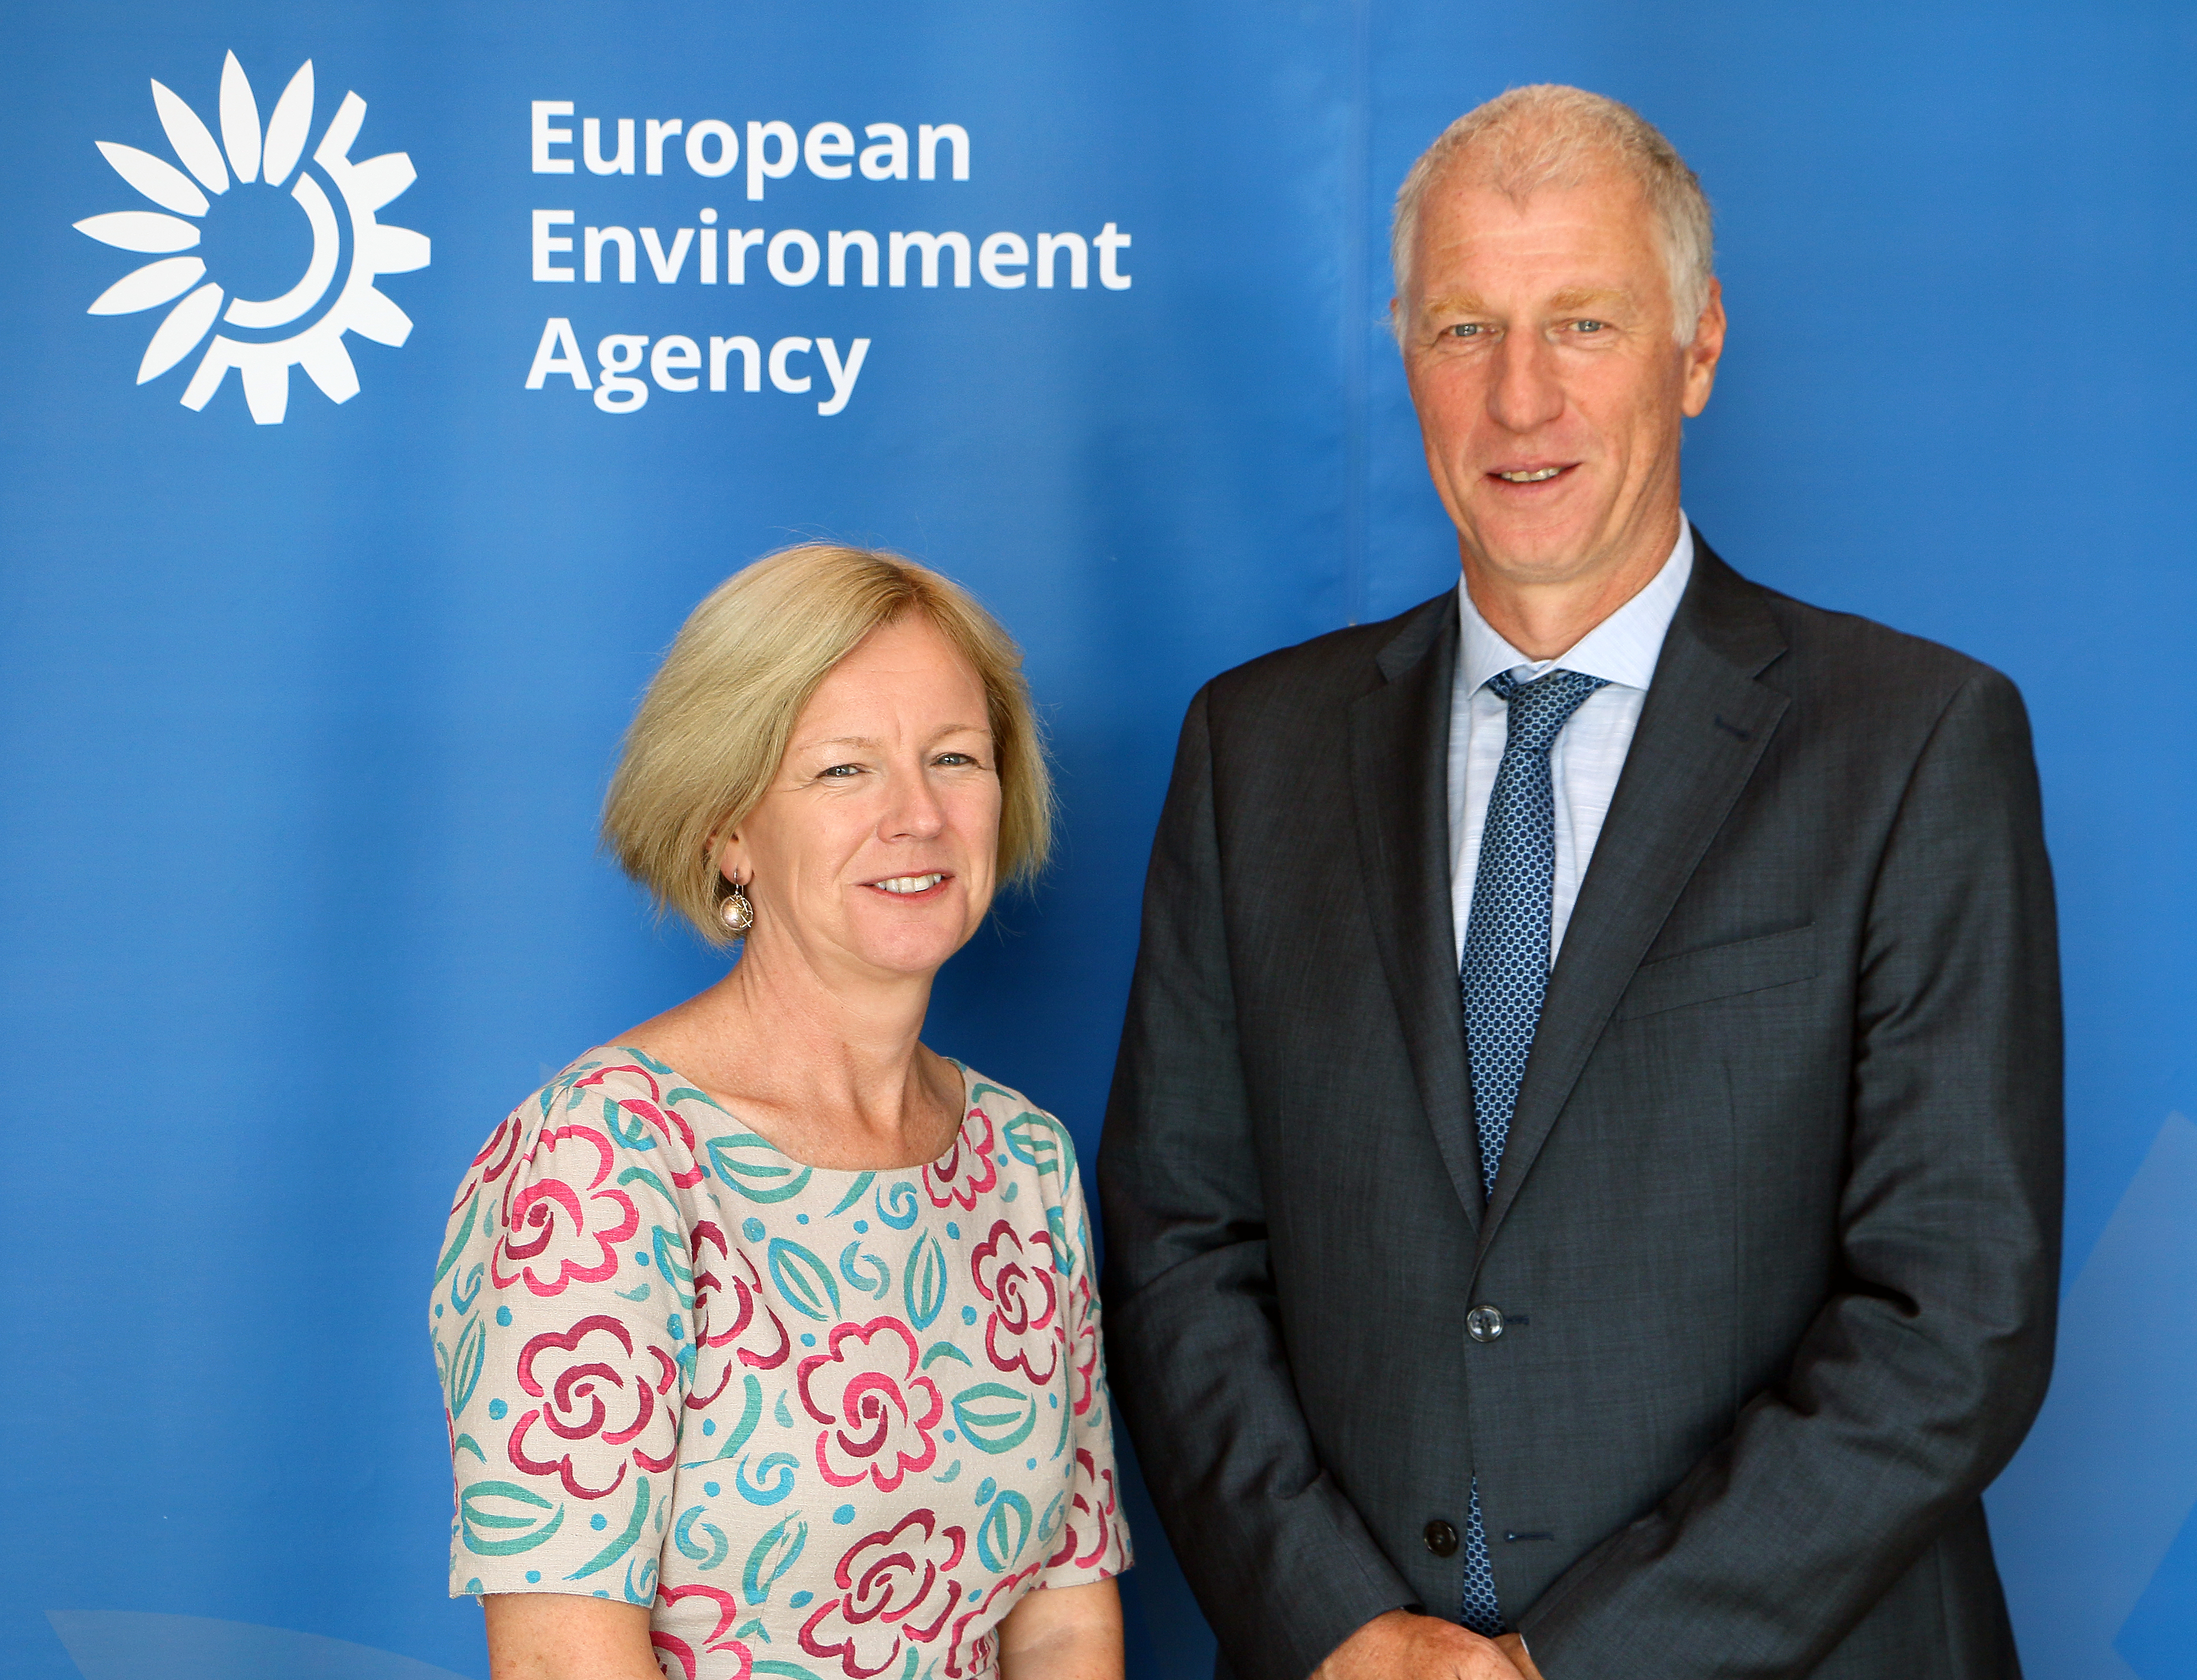 Laura Burke, chair of the EEA Management Board, with Hans Bruyninckx, EEA Executive Director